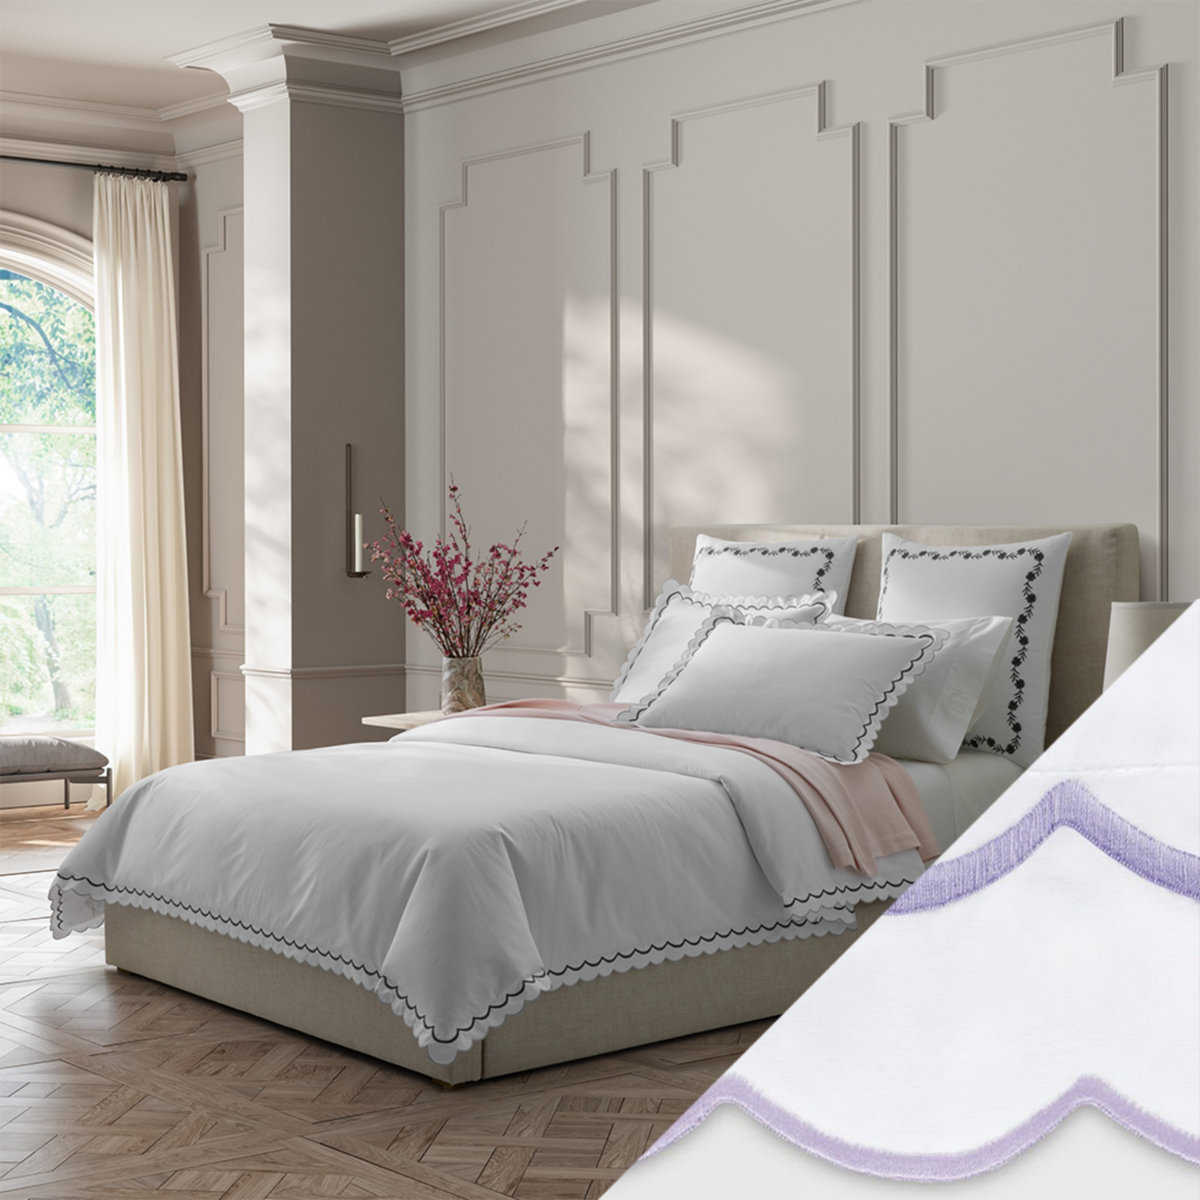 Full Bed Dressed in Matouk India Bedding in Charcoal Color with Lilac Swatch